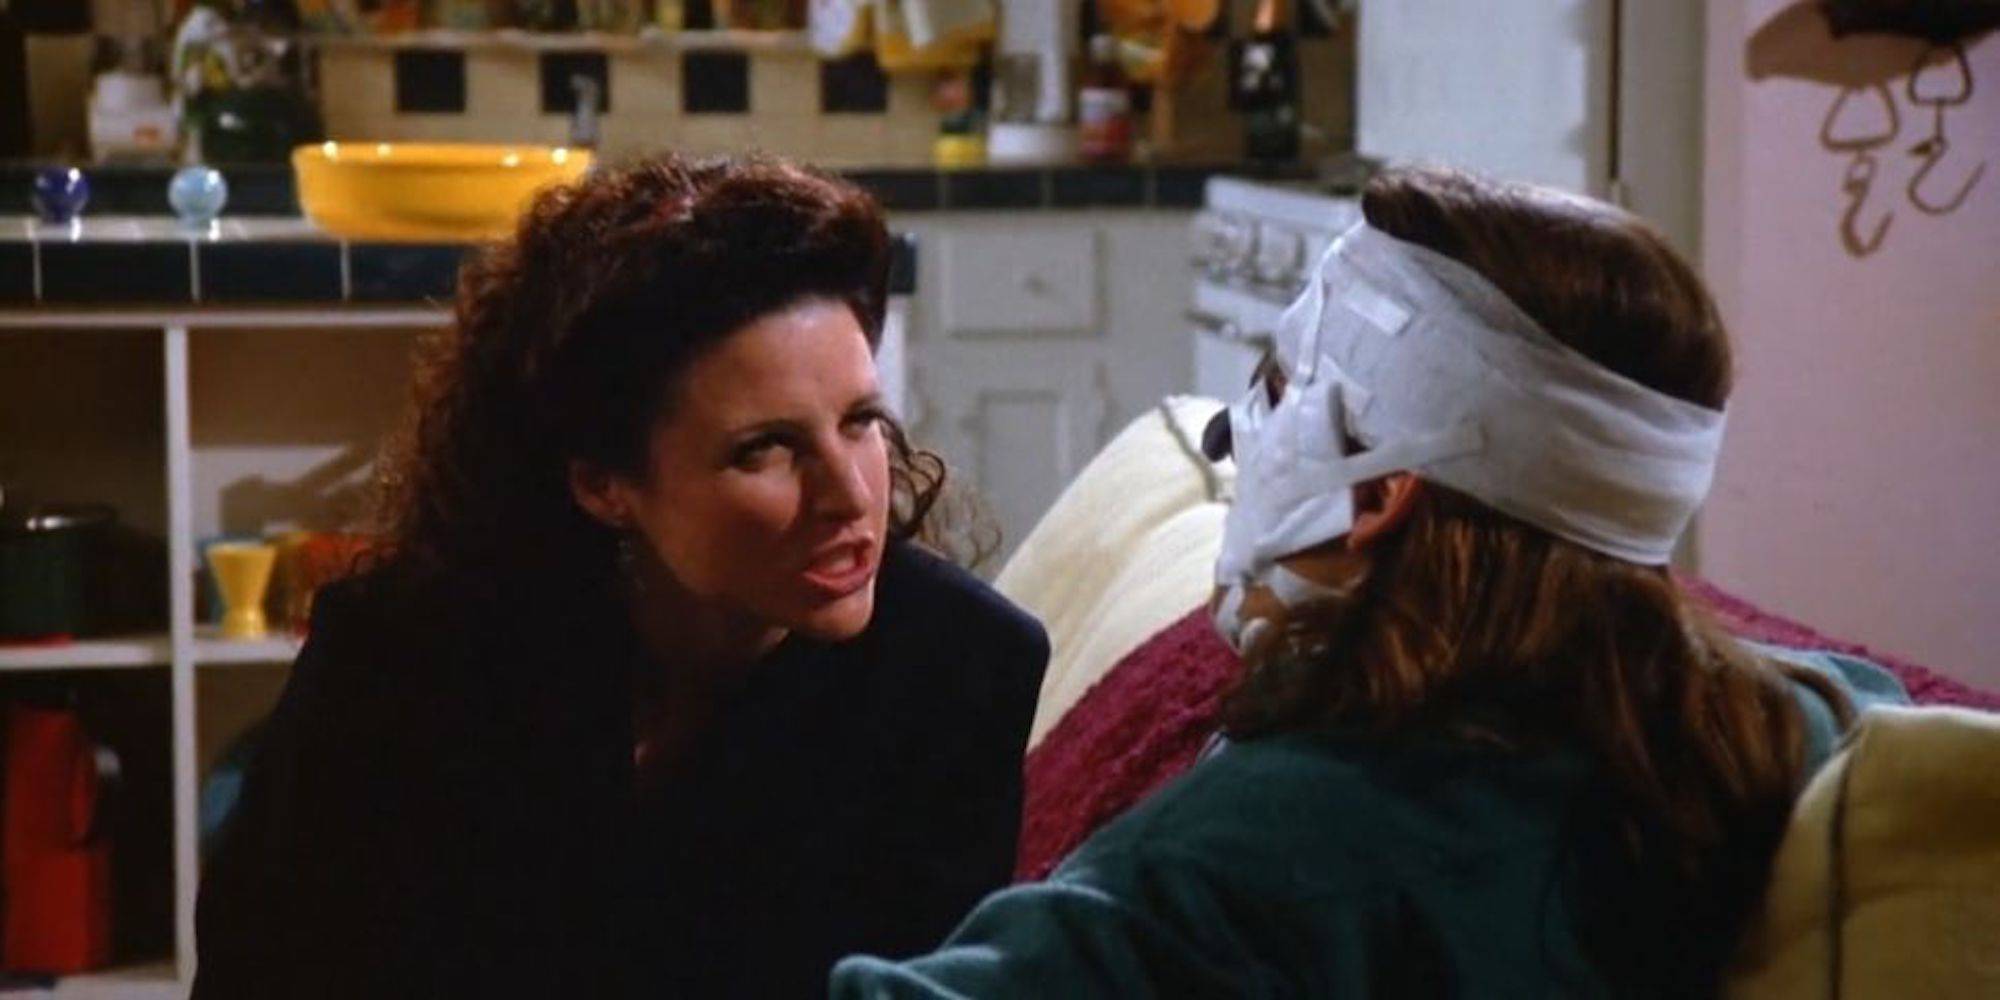 How many times was elaine pregnant on seinfeld?